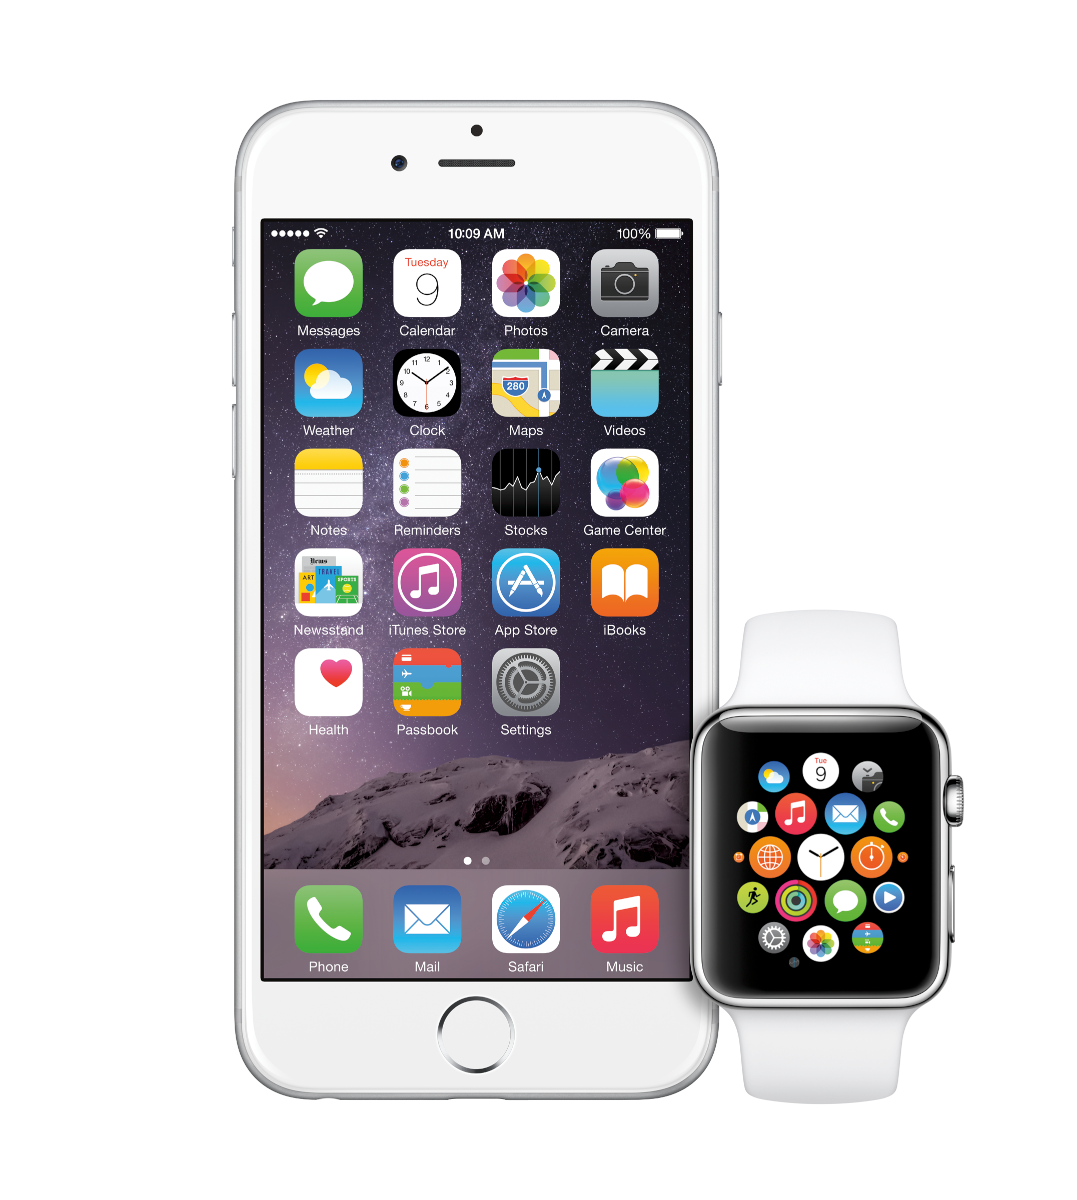 Apple Watch - Image by Permission of Apple